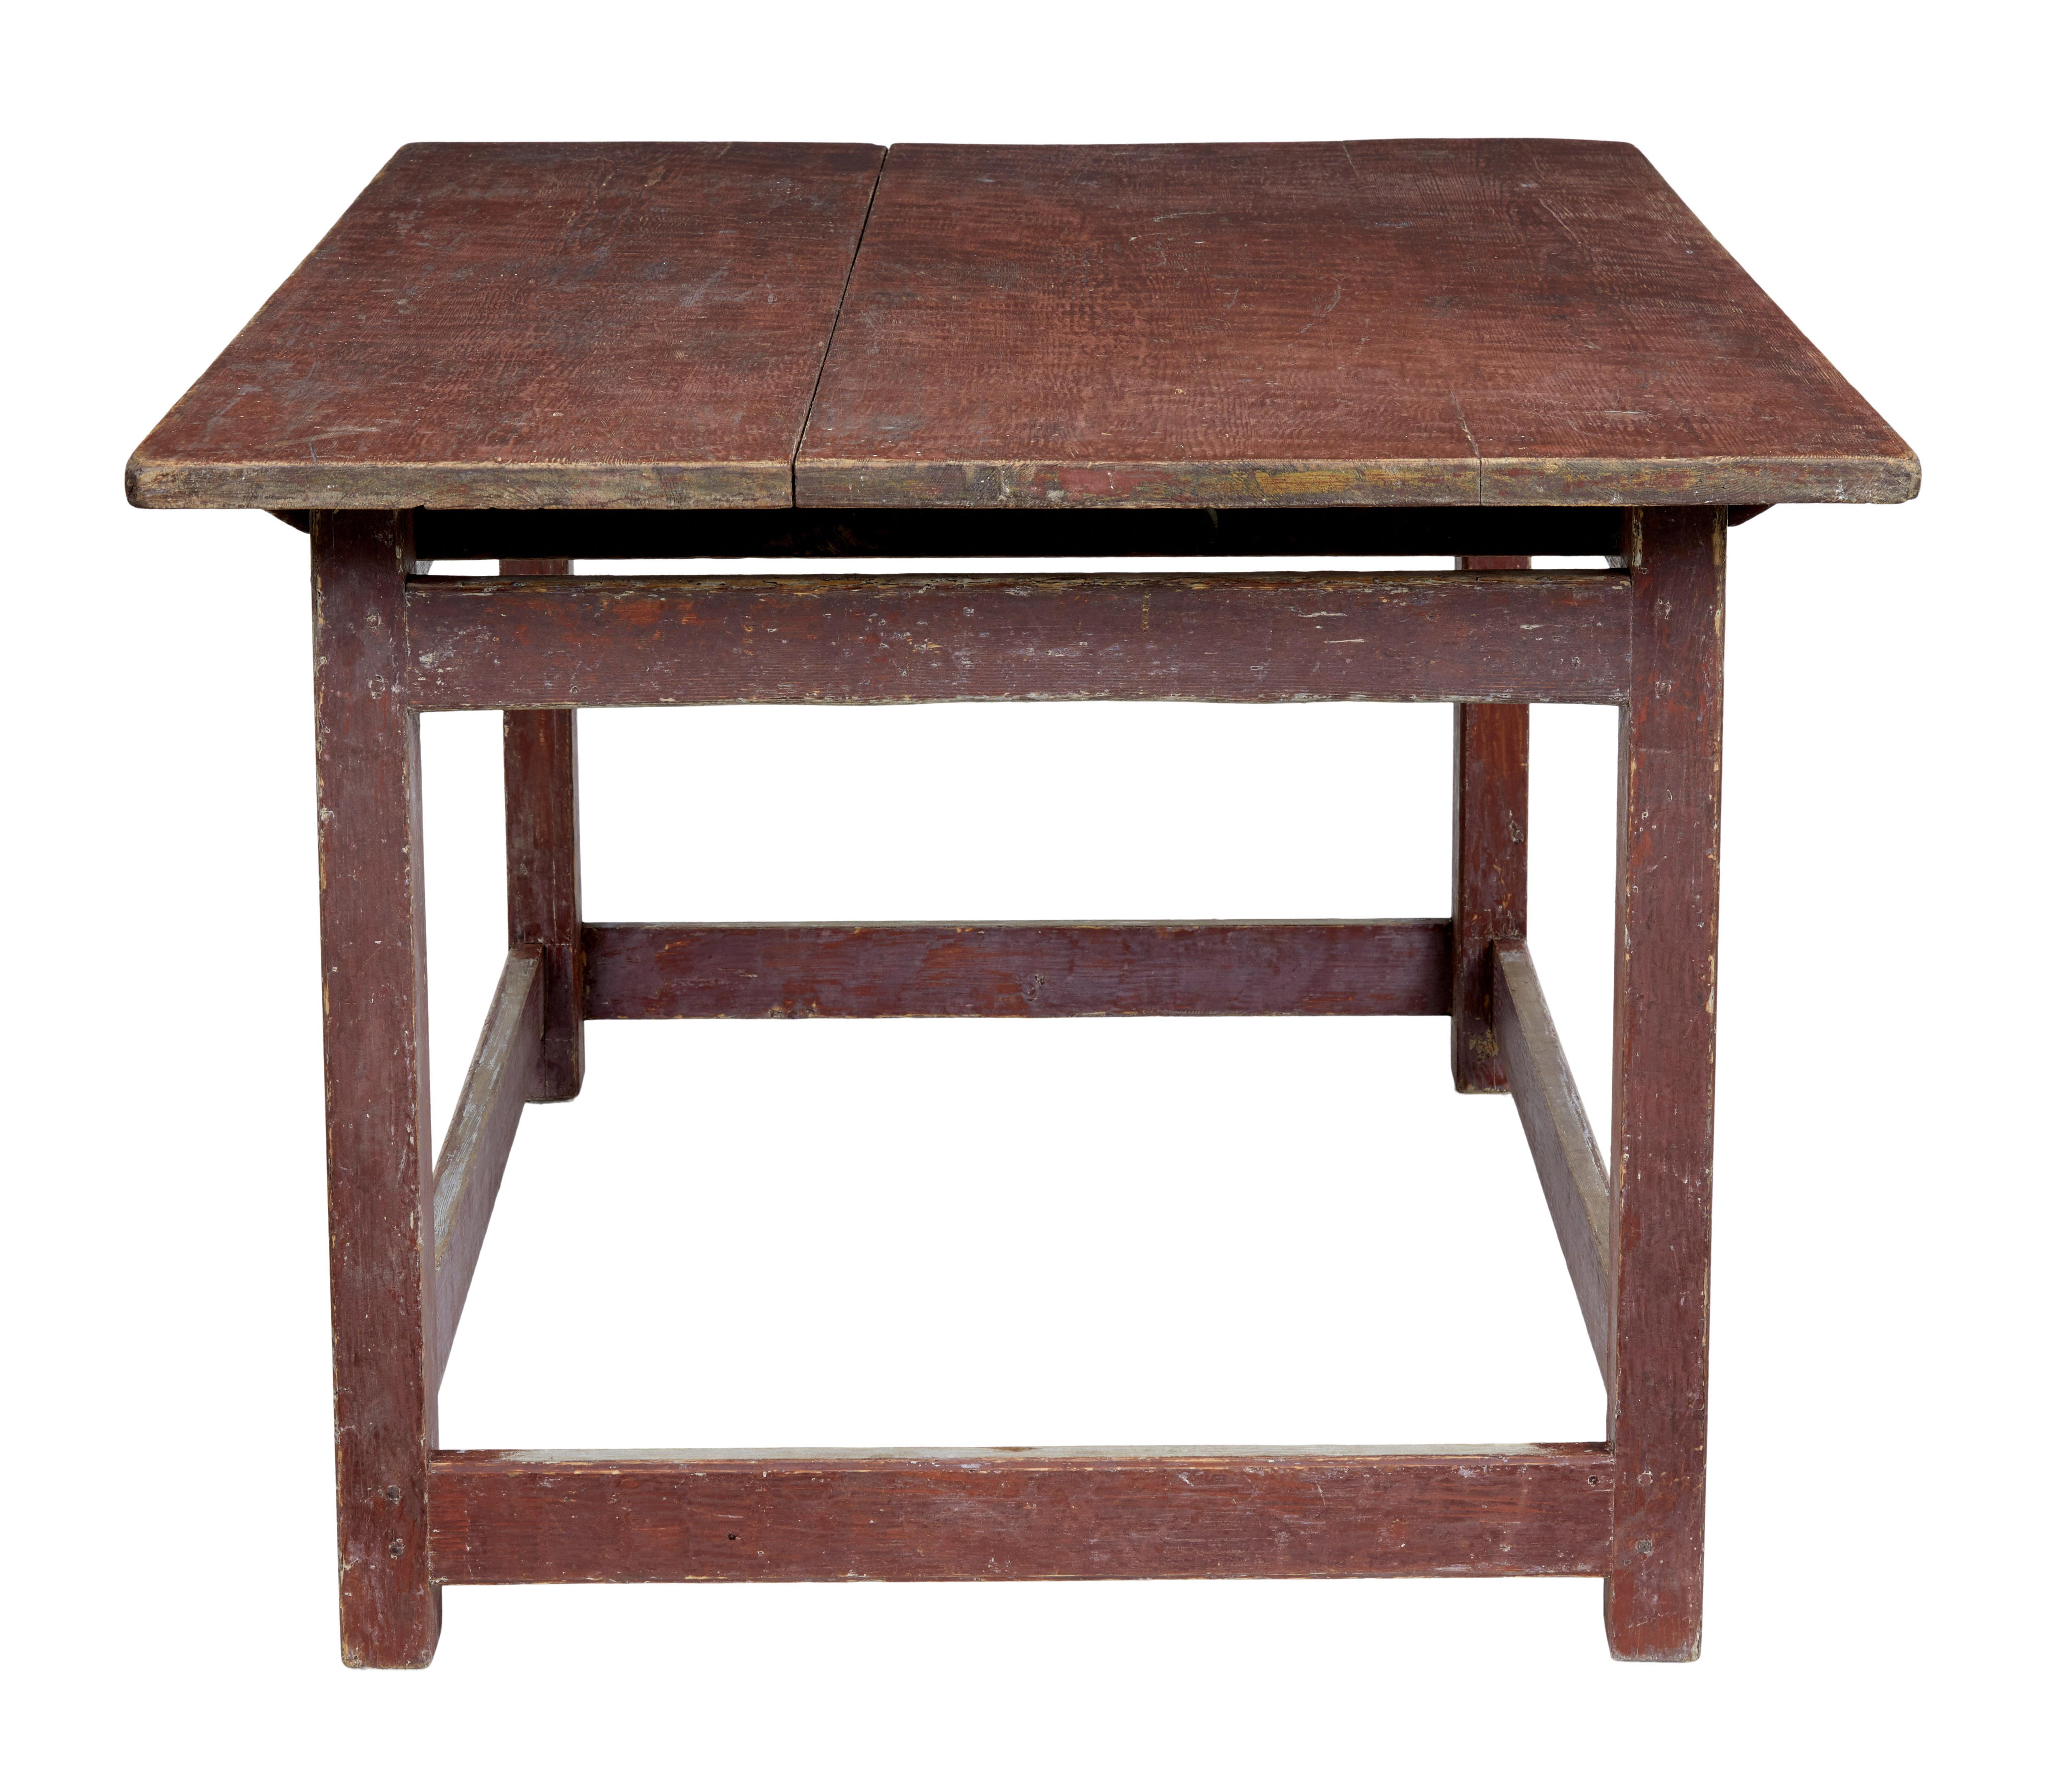 Hand-Painted Large 19th Century Scandinavian Pine Painted Table